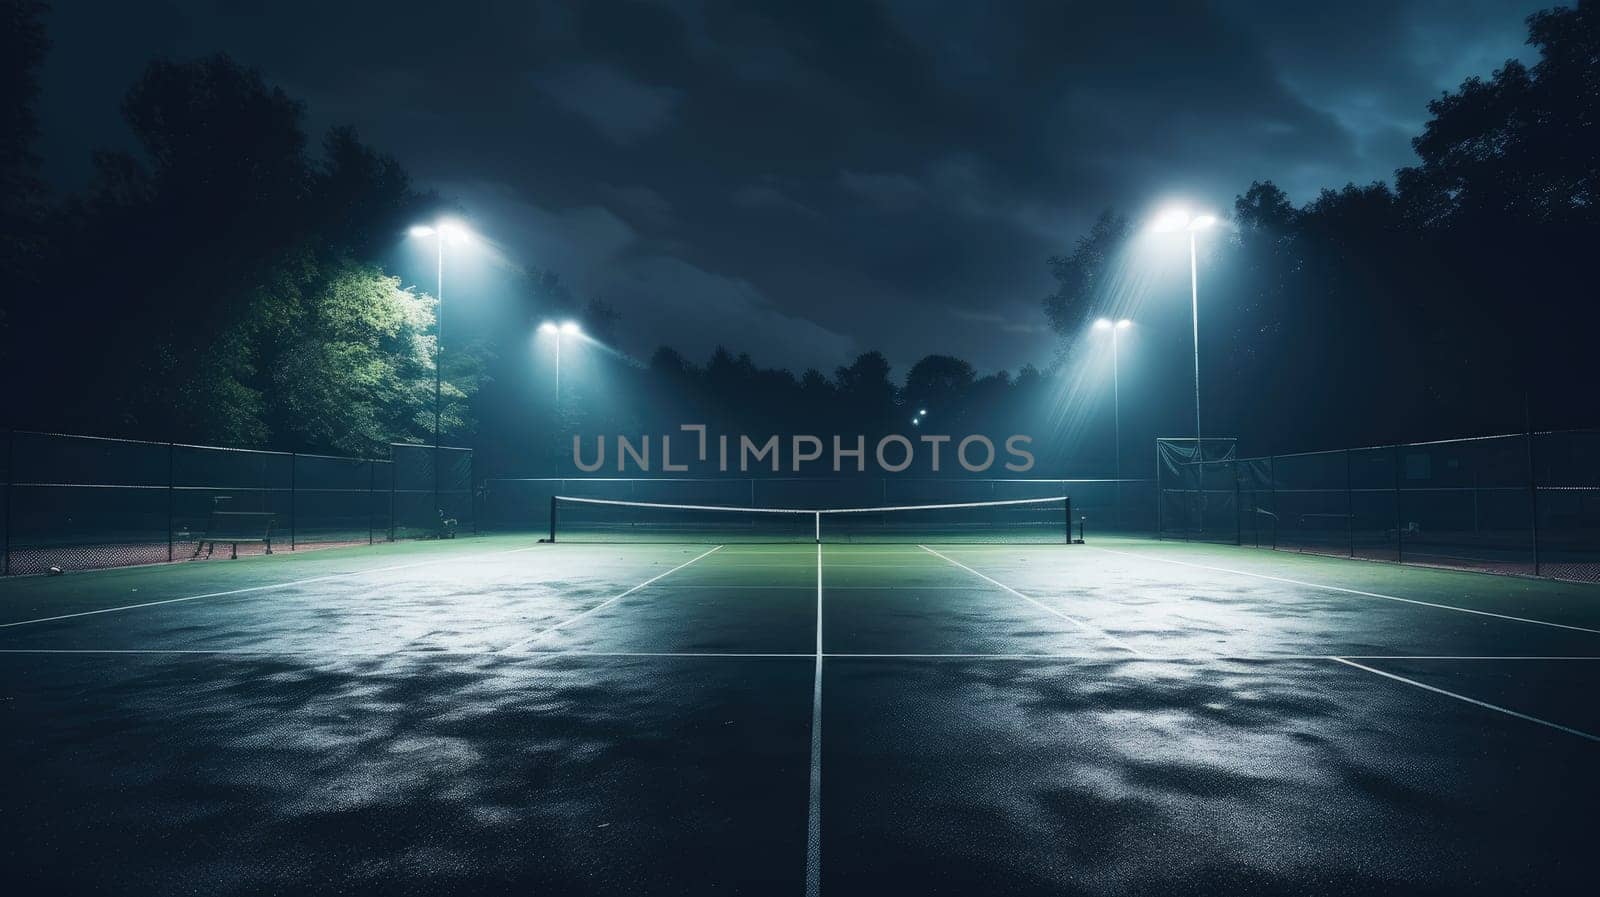 View of a tennis court with light from the spotlights over dark background by natali_brill